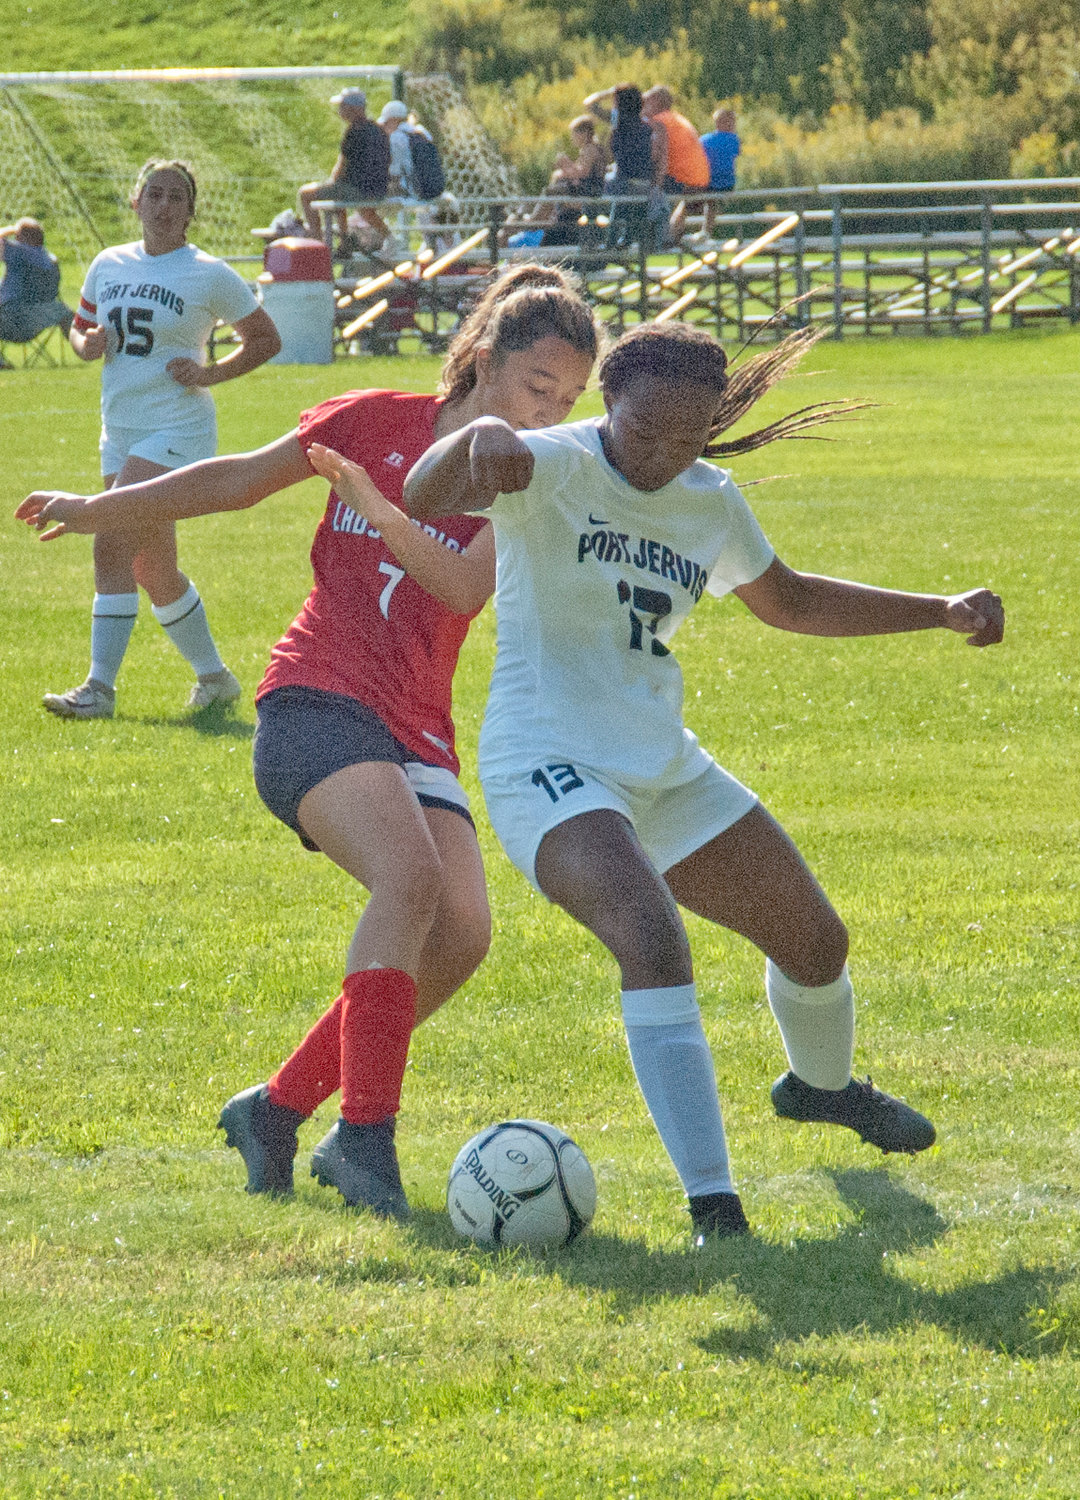 Liberty’s Hennesi Rebolledo battles for the ball. Rebolledo scored the Lady Indians’ only goal in a 6-1 loss on Tuesday.